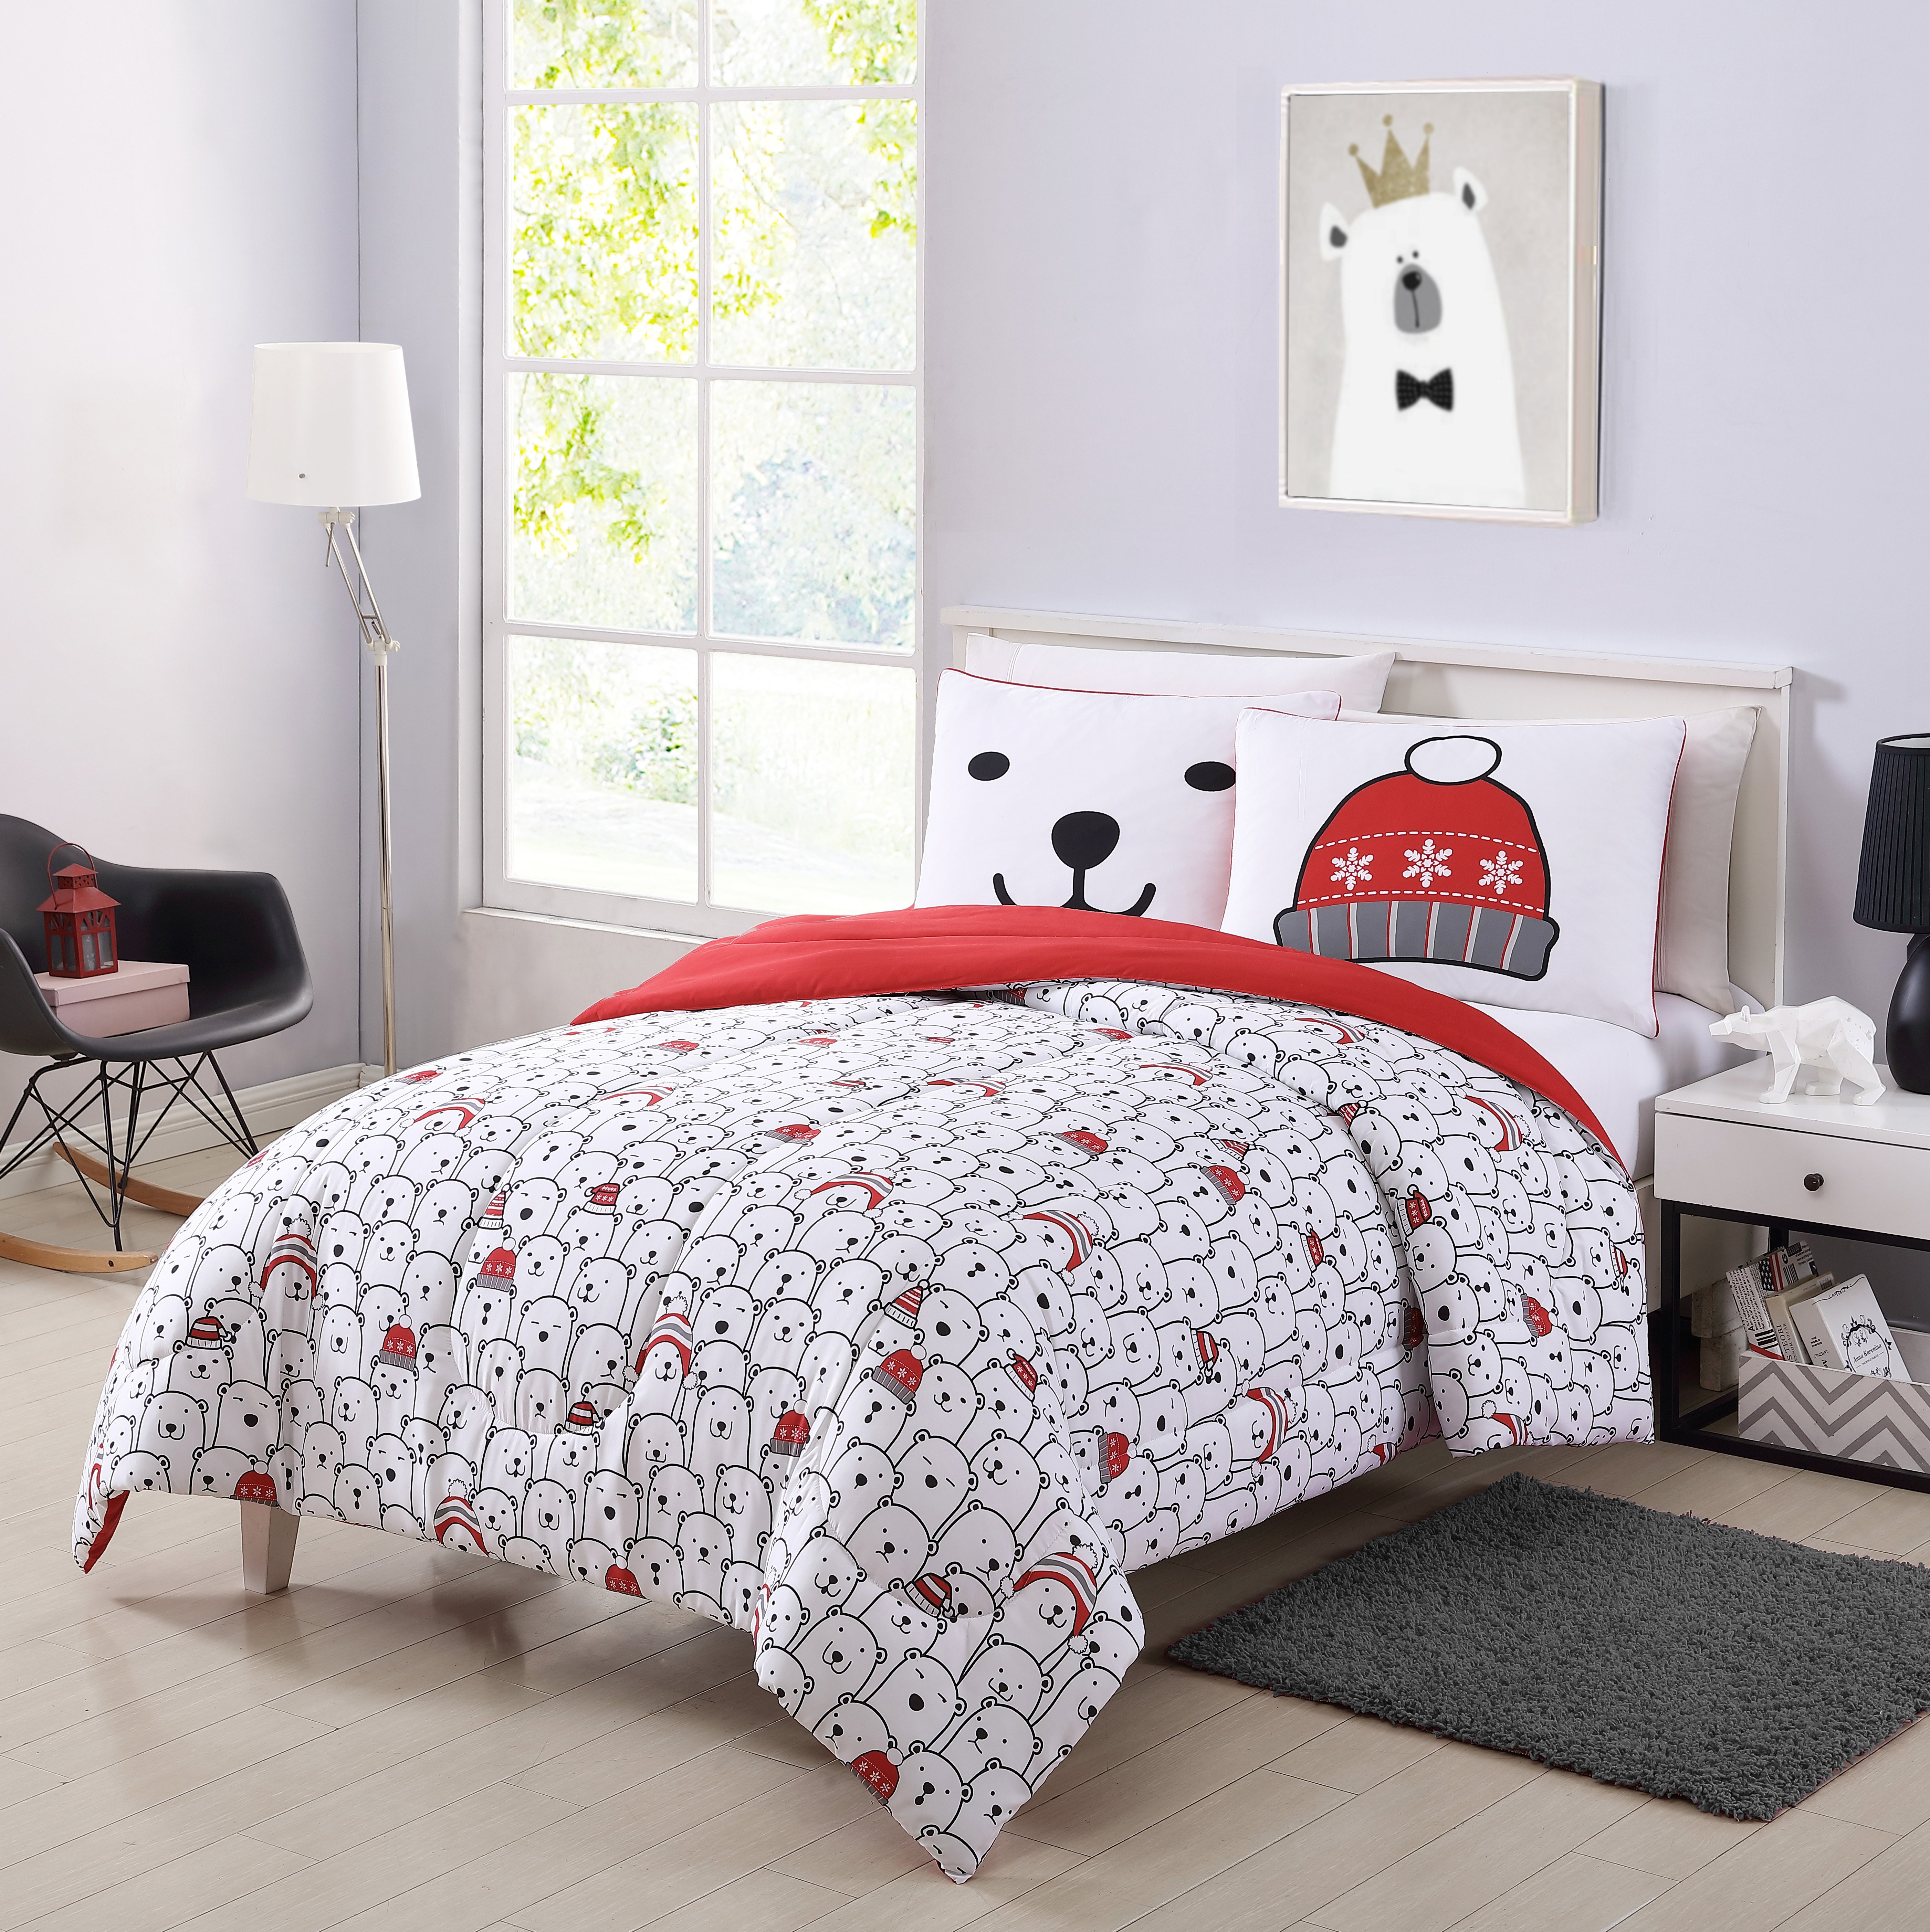 Minnie Mouse Bedroom Furniture Elegant Your Zone Sleepy Angel Bed In A Bag Bedding Set W Reversible forter